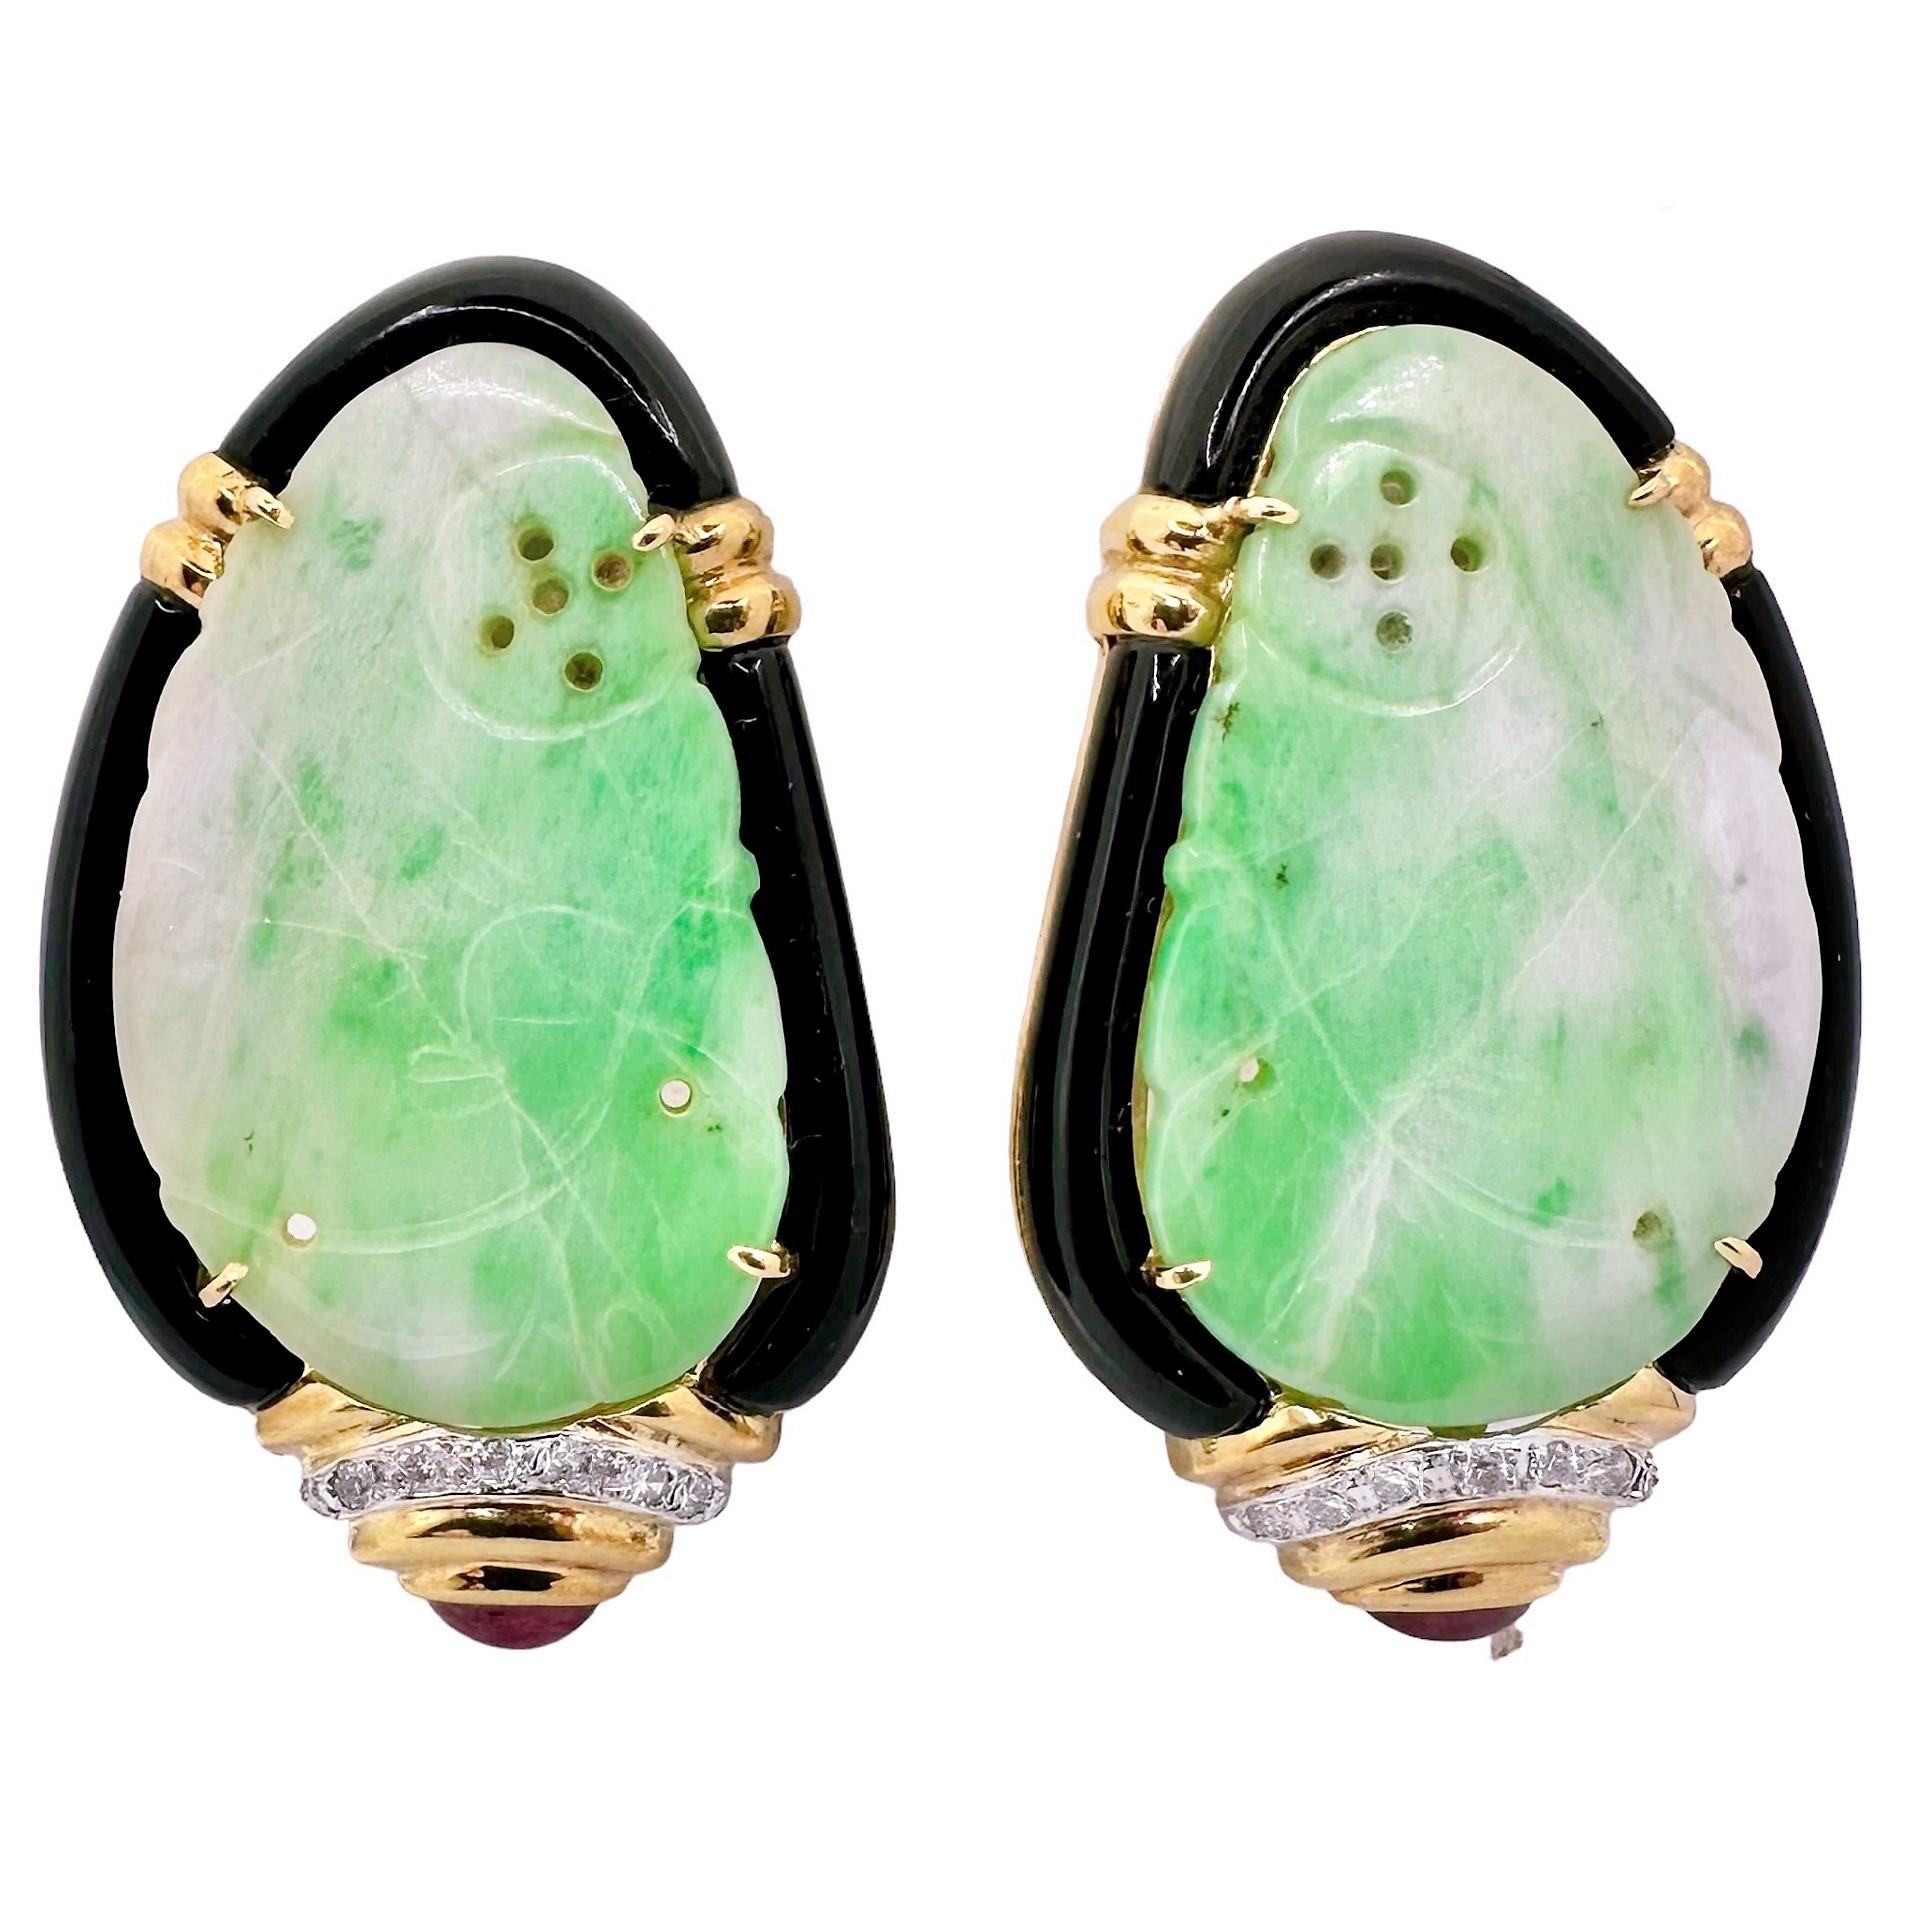 This striking vintage pair of late-20th Century fashion earrings have, as their focal point, two quite large jadeite jade panels which are each painstakingly hand pierced and carved in stylized floral motifs. Surrounding these panels are delicately